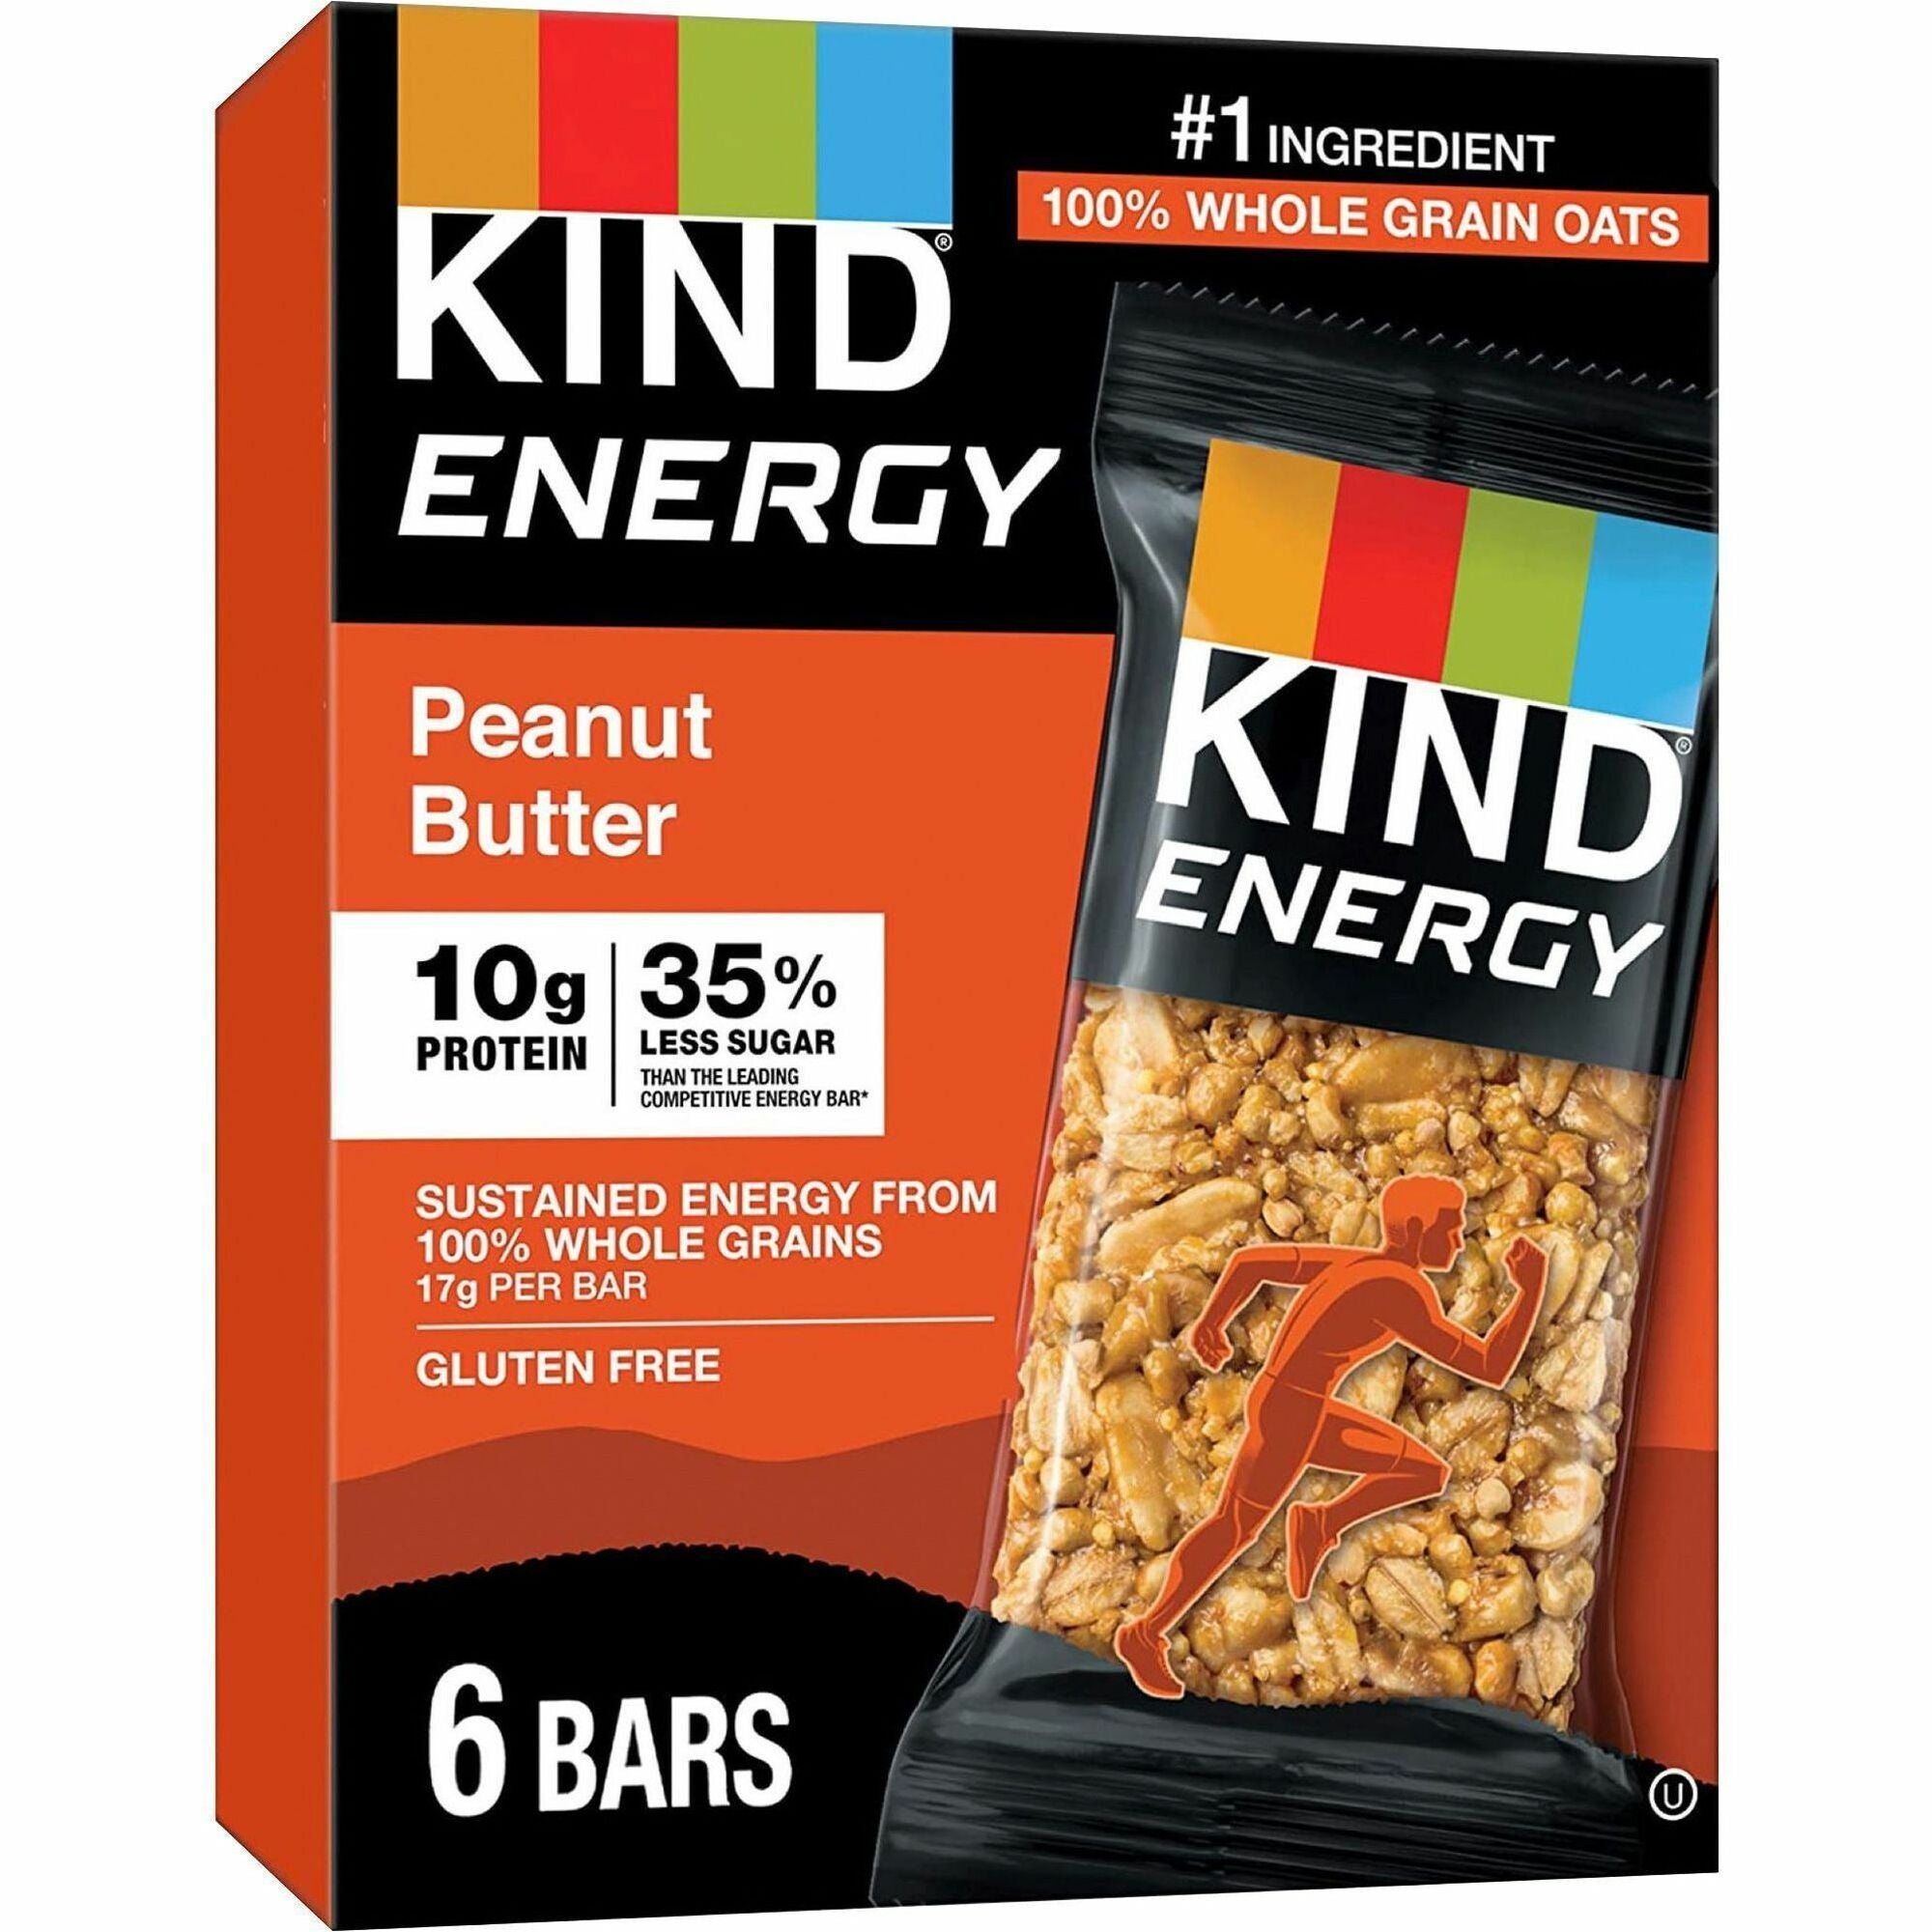 kind-energy-bars-trans-fat-free-gluten-free-individually-wrapped-peanut-butter-210-oz-6-box_knd28715 - 1